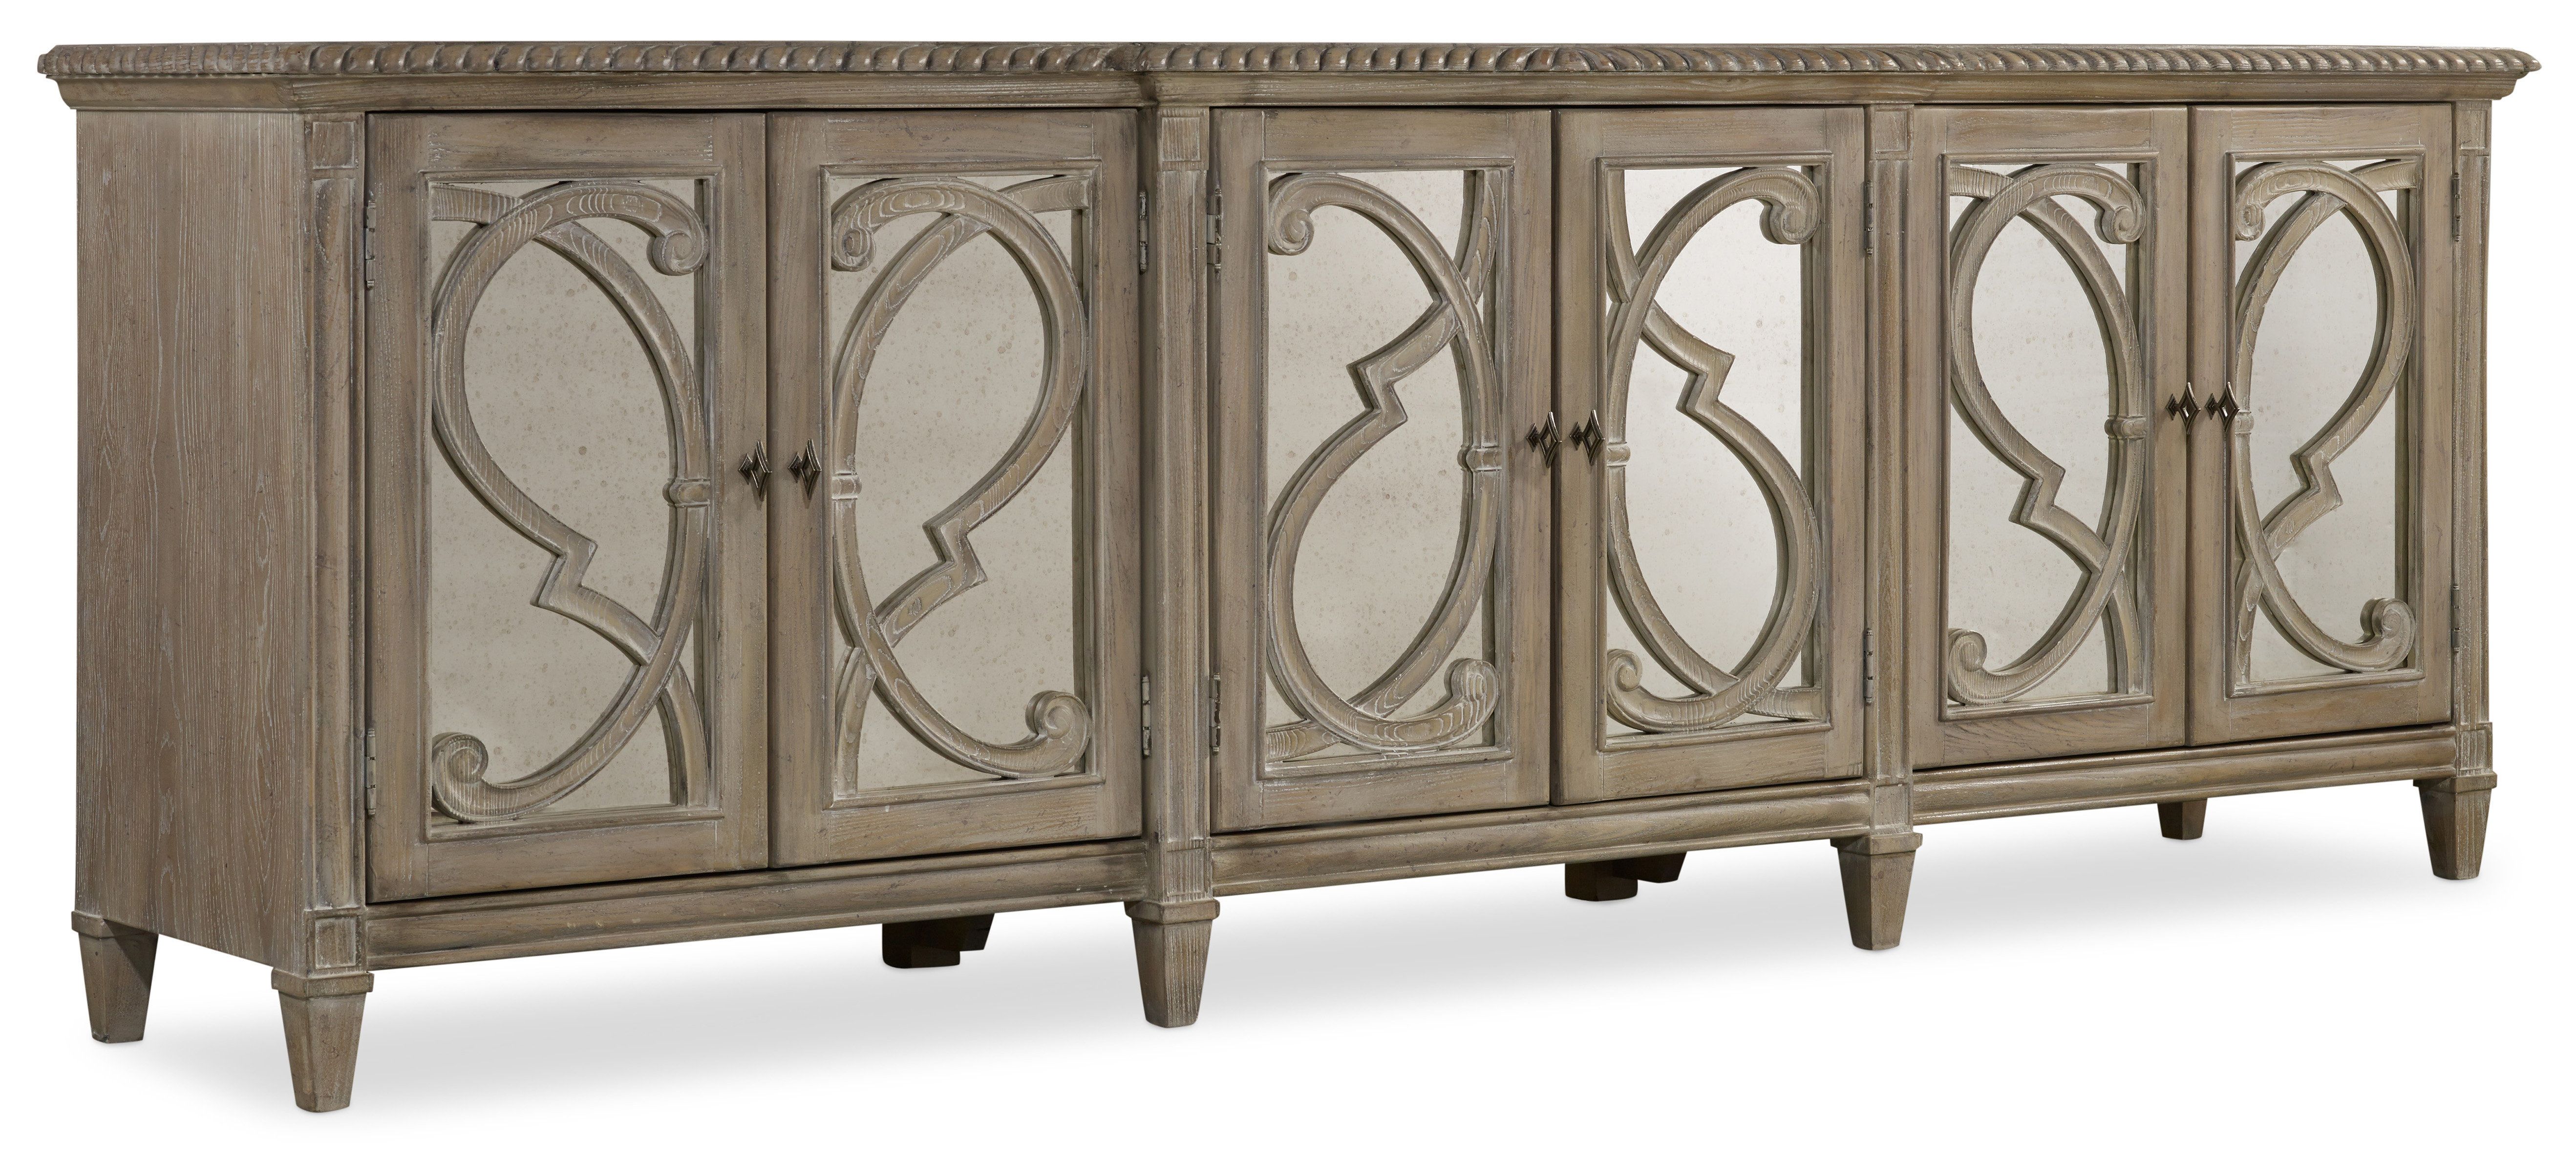 Solana Sideboard For Best And Newest Haroun Mocha Sideboards (View 15 of 20)